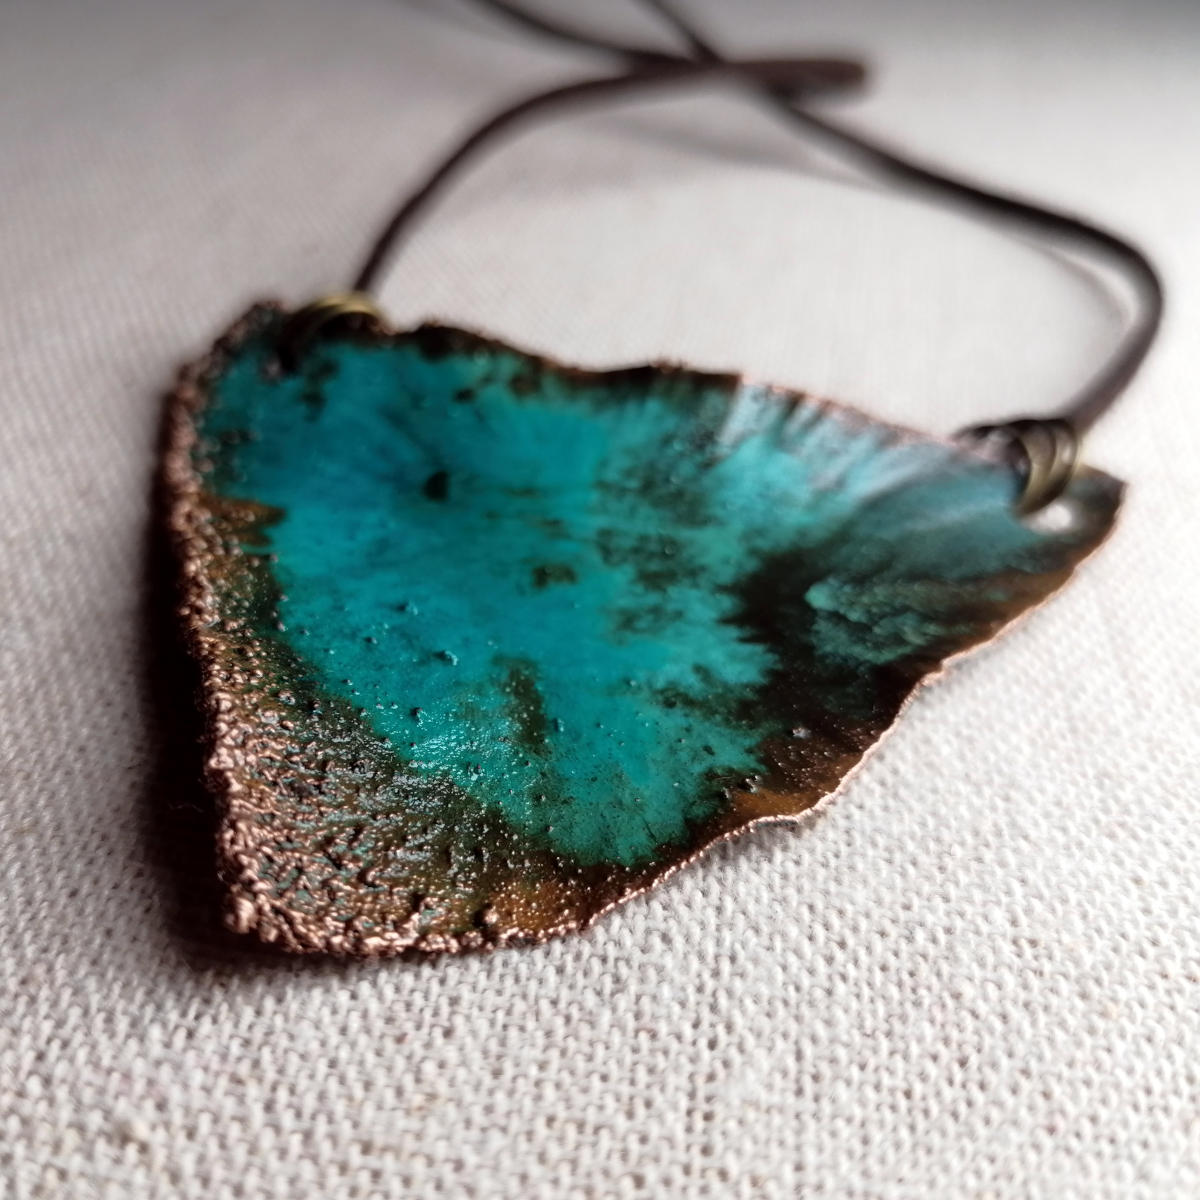 Copper turning green with oxidation